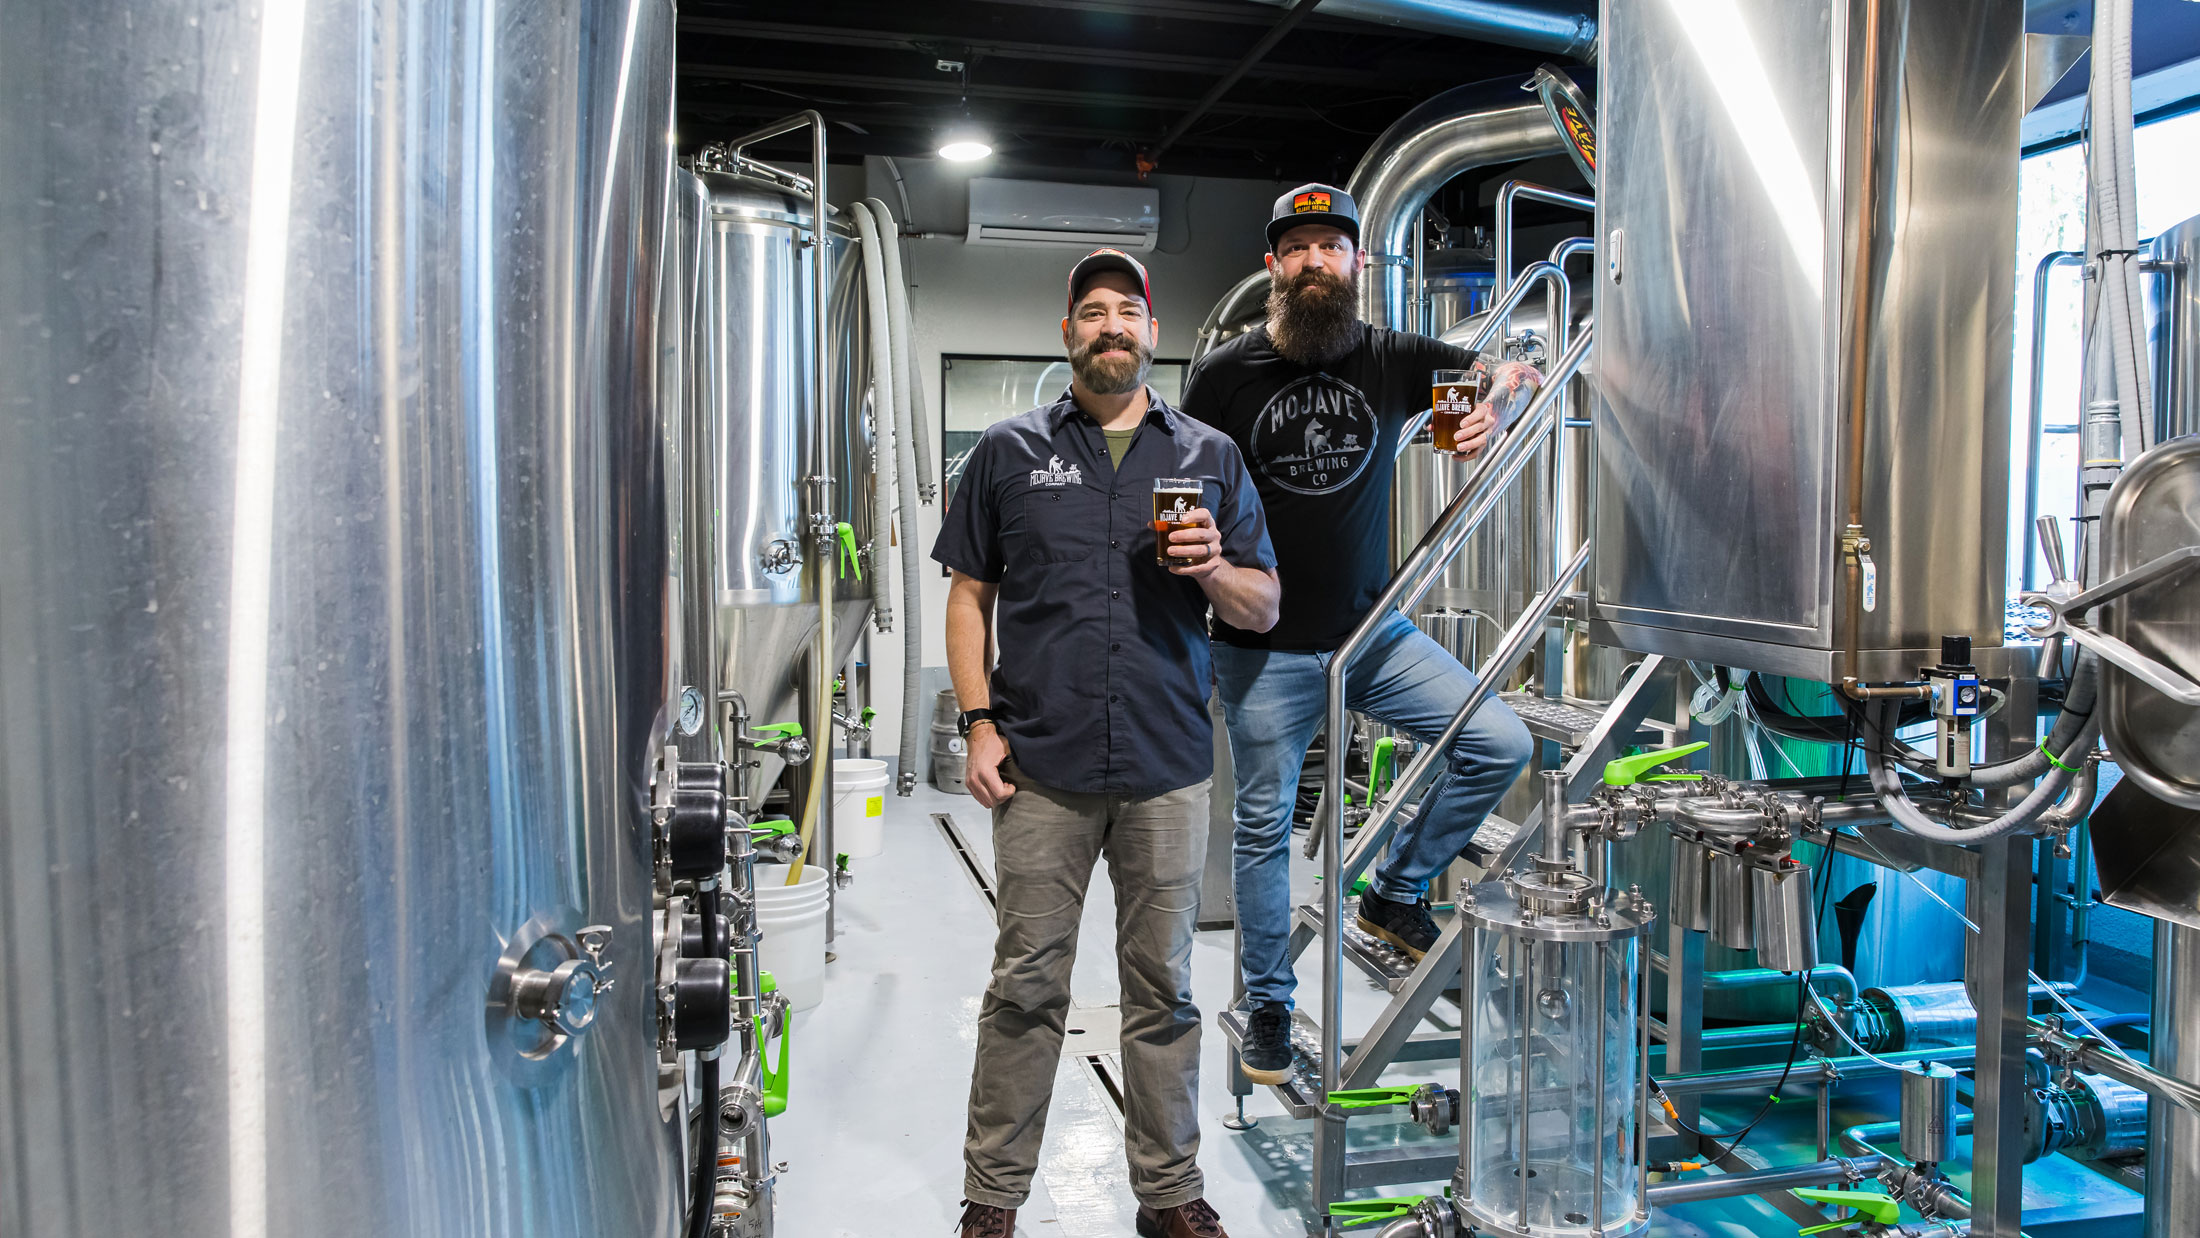 John “Griff” Griffith & Nate Carney of Mojave Brewing